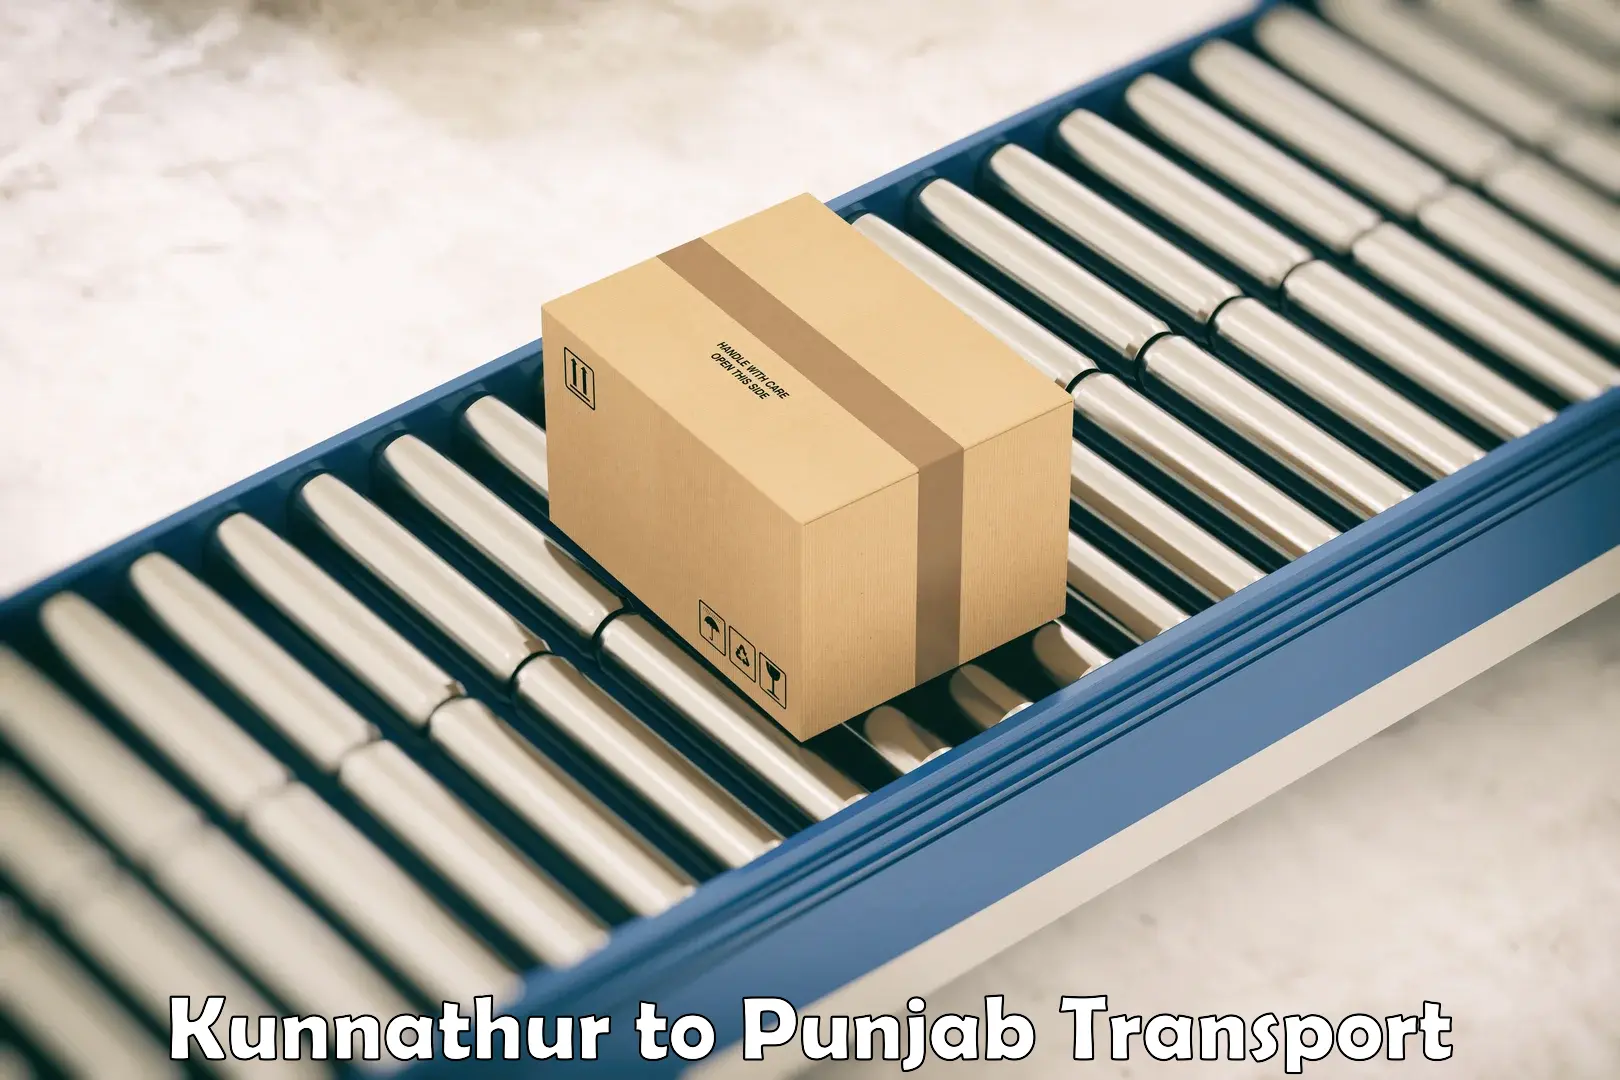 Commercial transport service Kunnathur to Pathankot